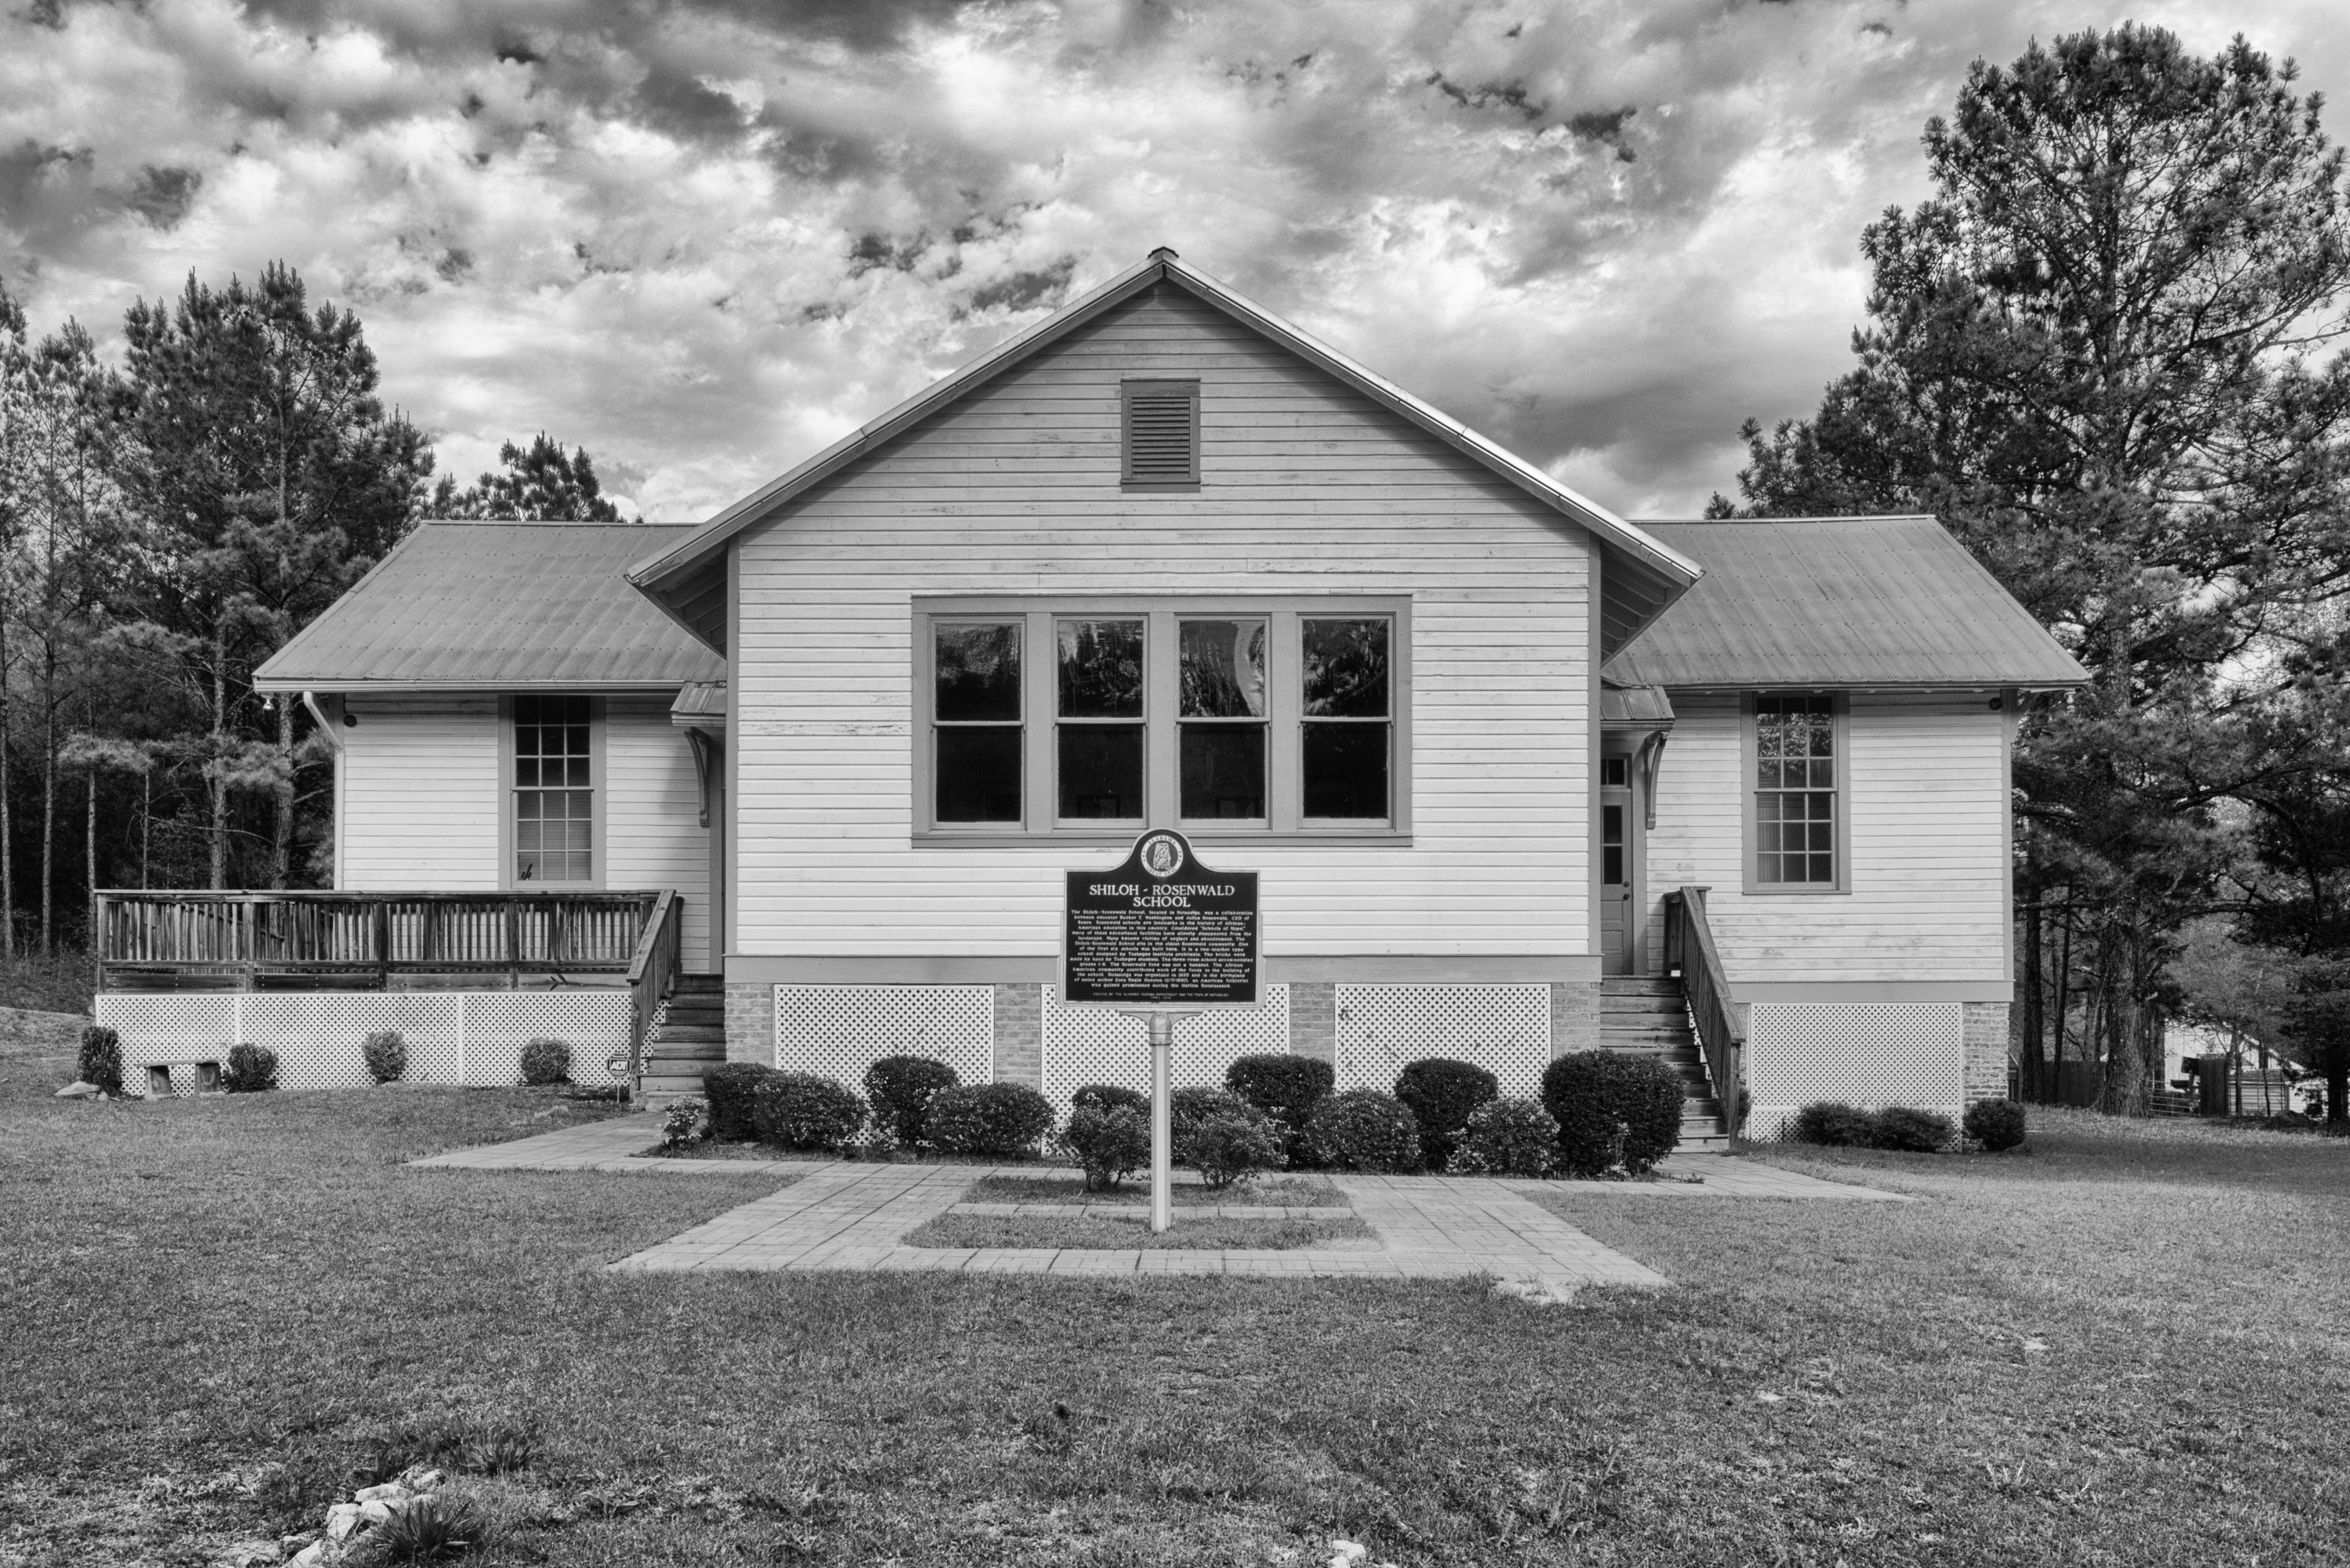 A black and white photo of a small, one-story school surrounded by trees. A sign stands in front of the school that says, "Shiloh-Rosenwald School", followed by small font text that isn't legible.